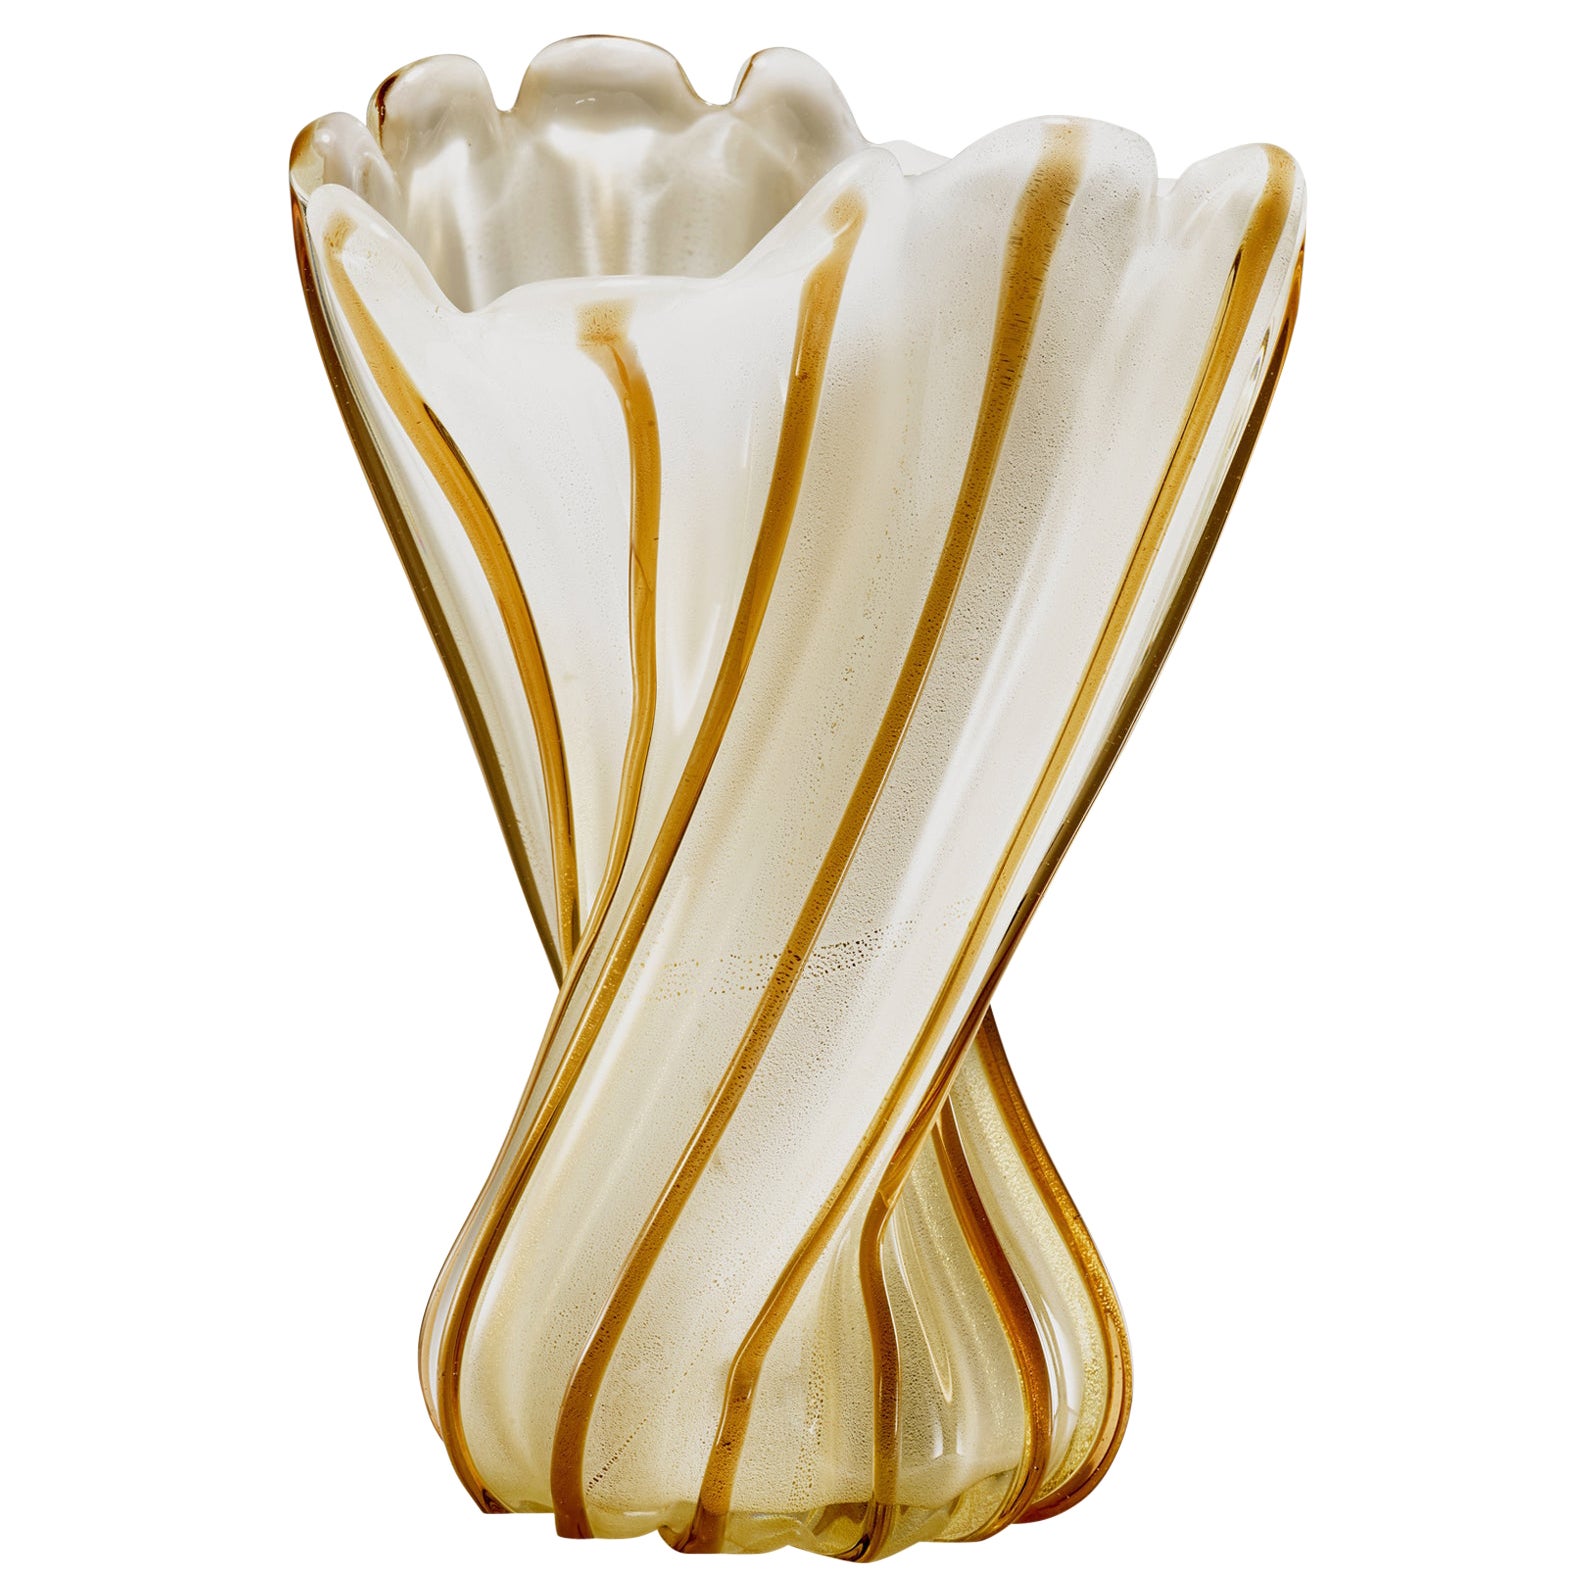 Ritorto Vase with Gold Leaf by Archimede Seguso Murano 1955